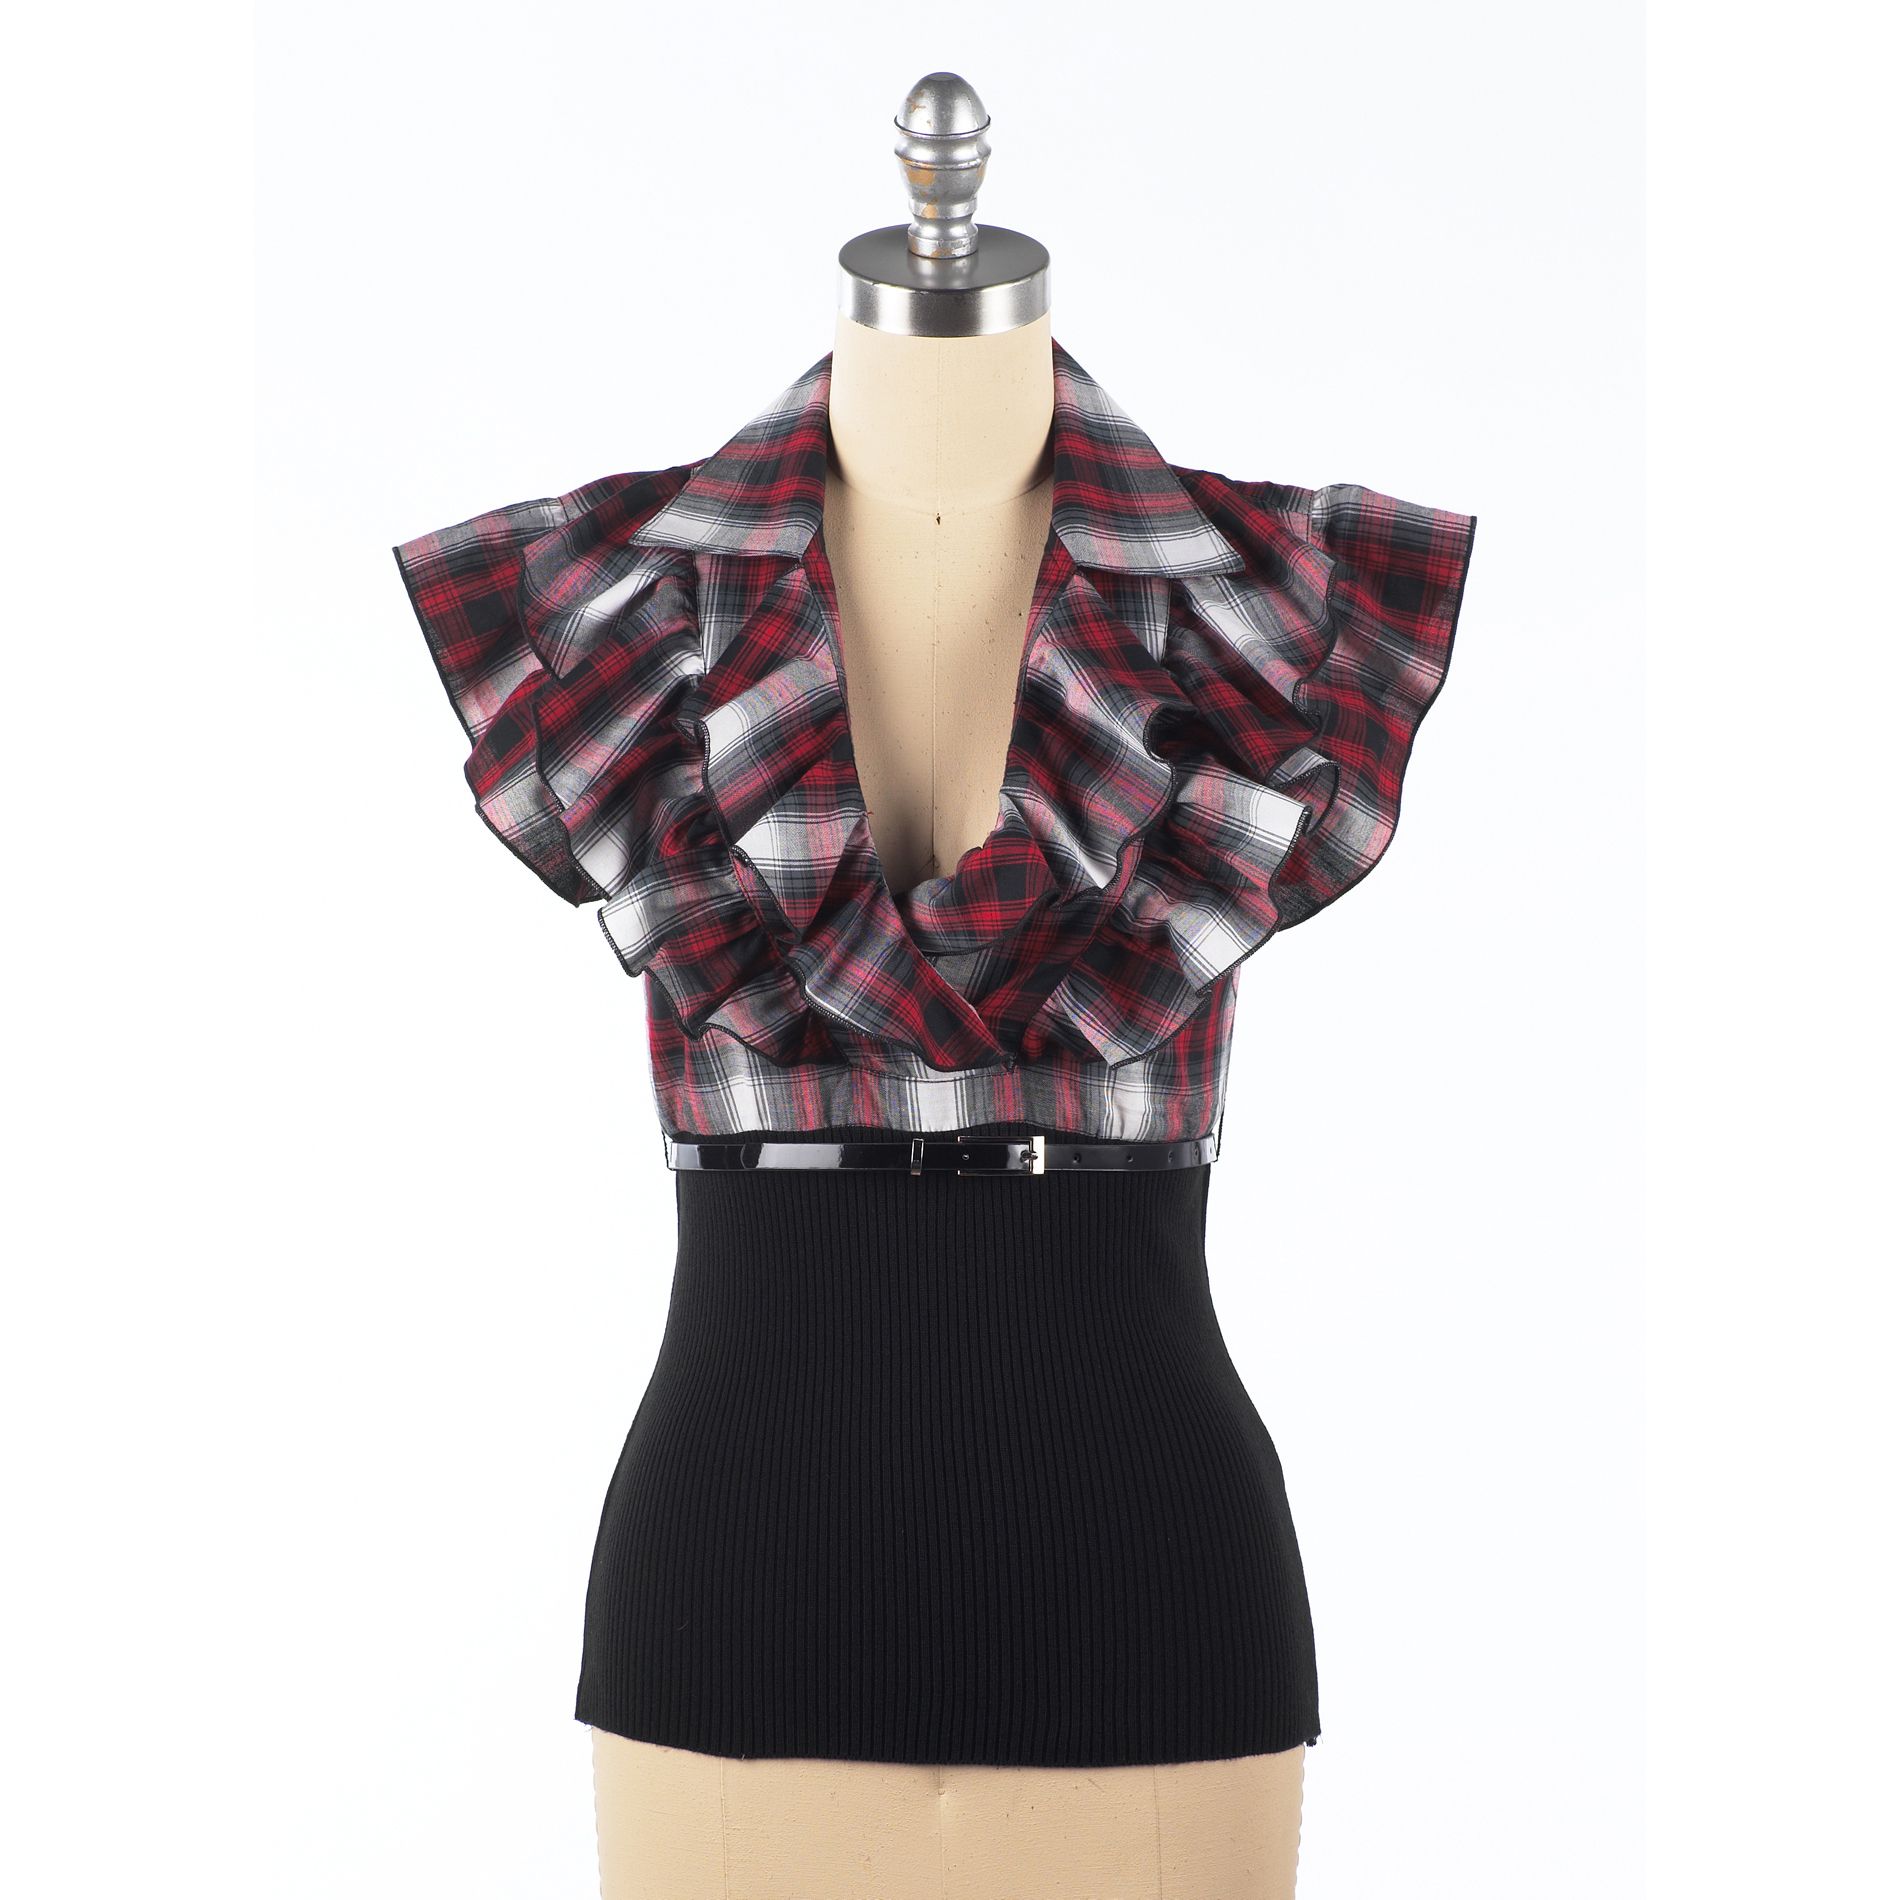 Wrapper Layered Plaid Top